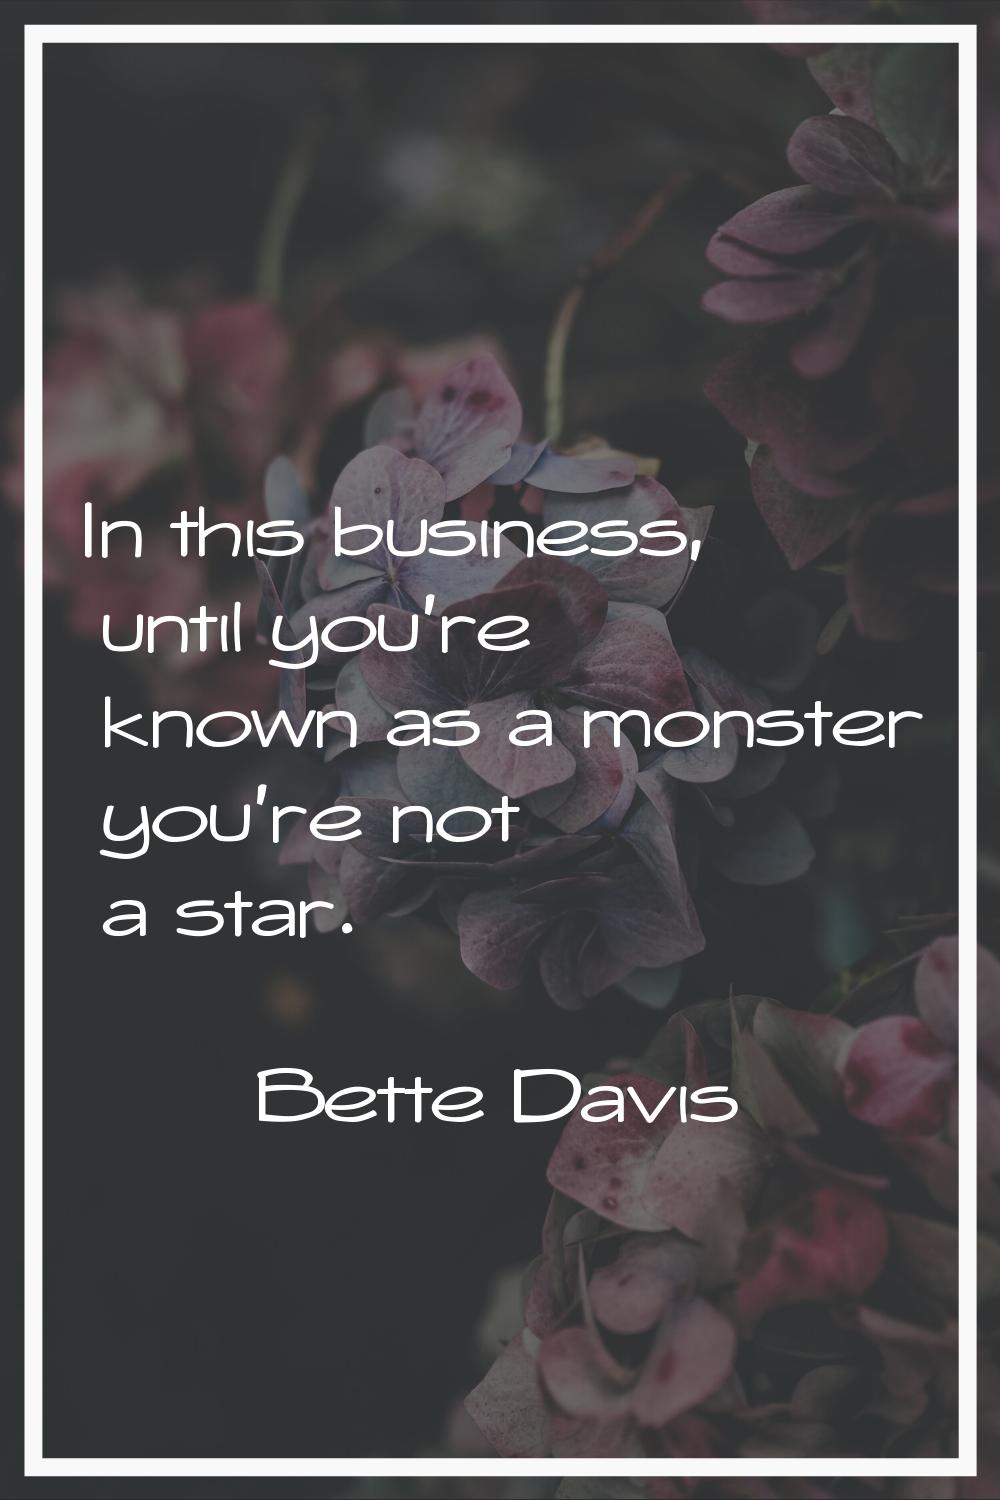 In this business, until you're known as a monster you're not a star.